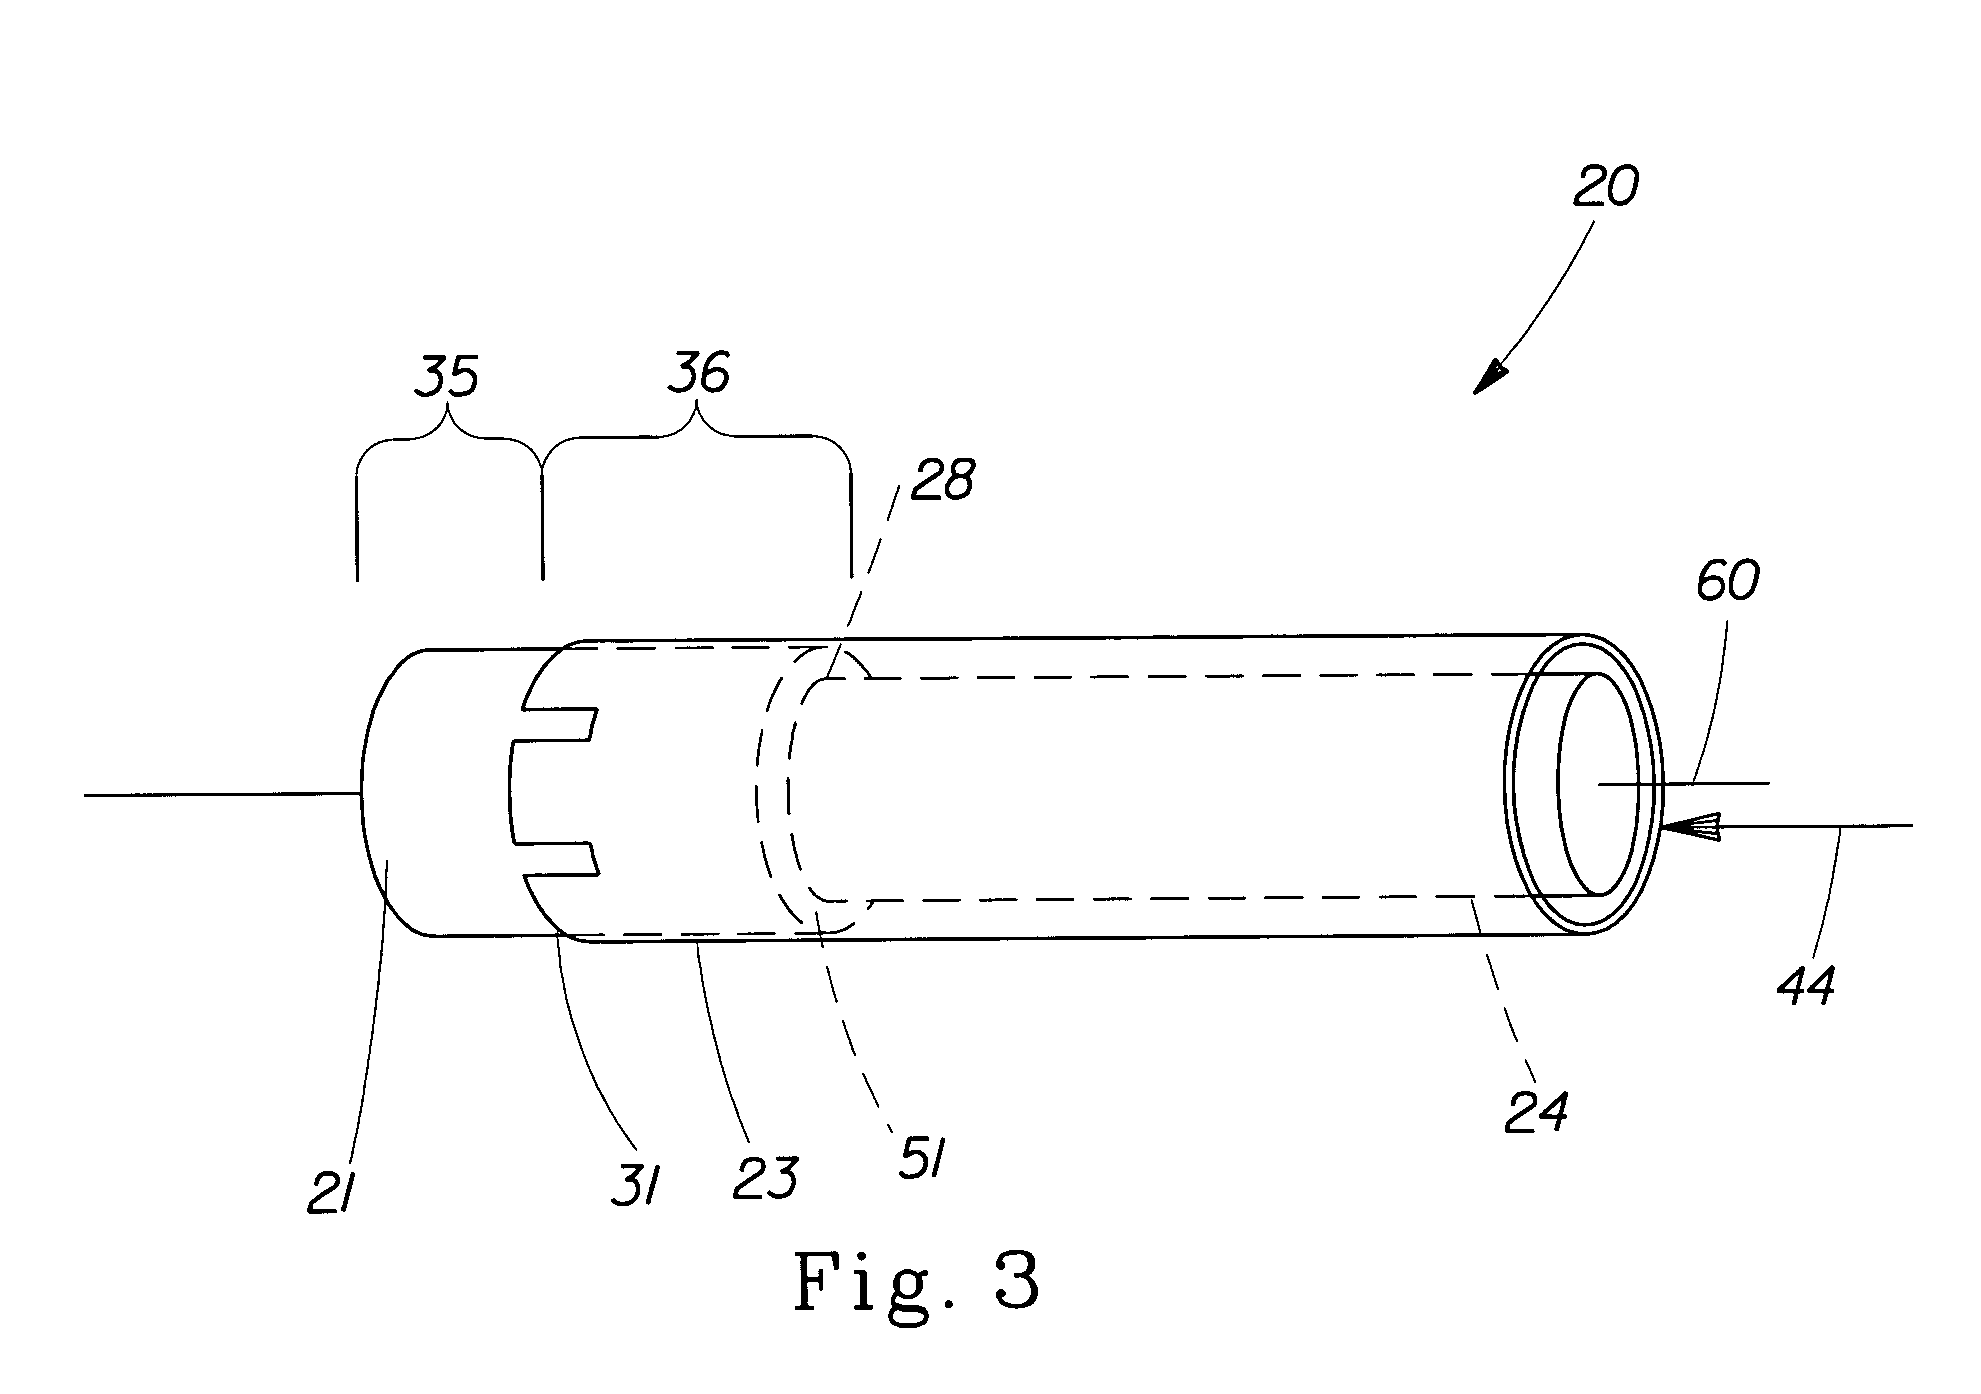 Tampon applicator providing low placement